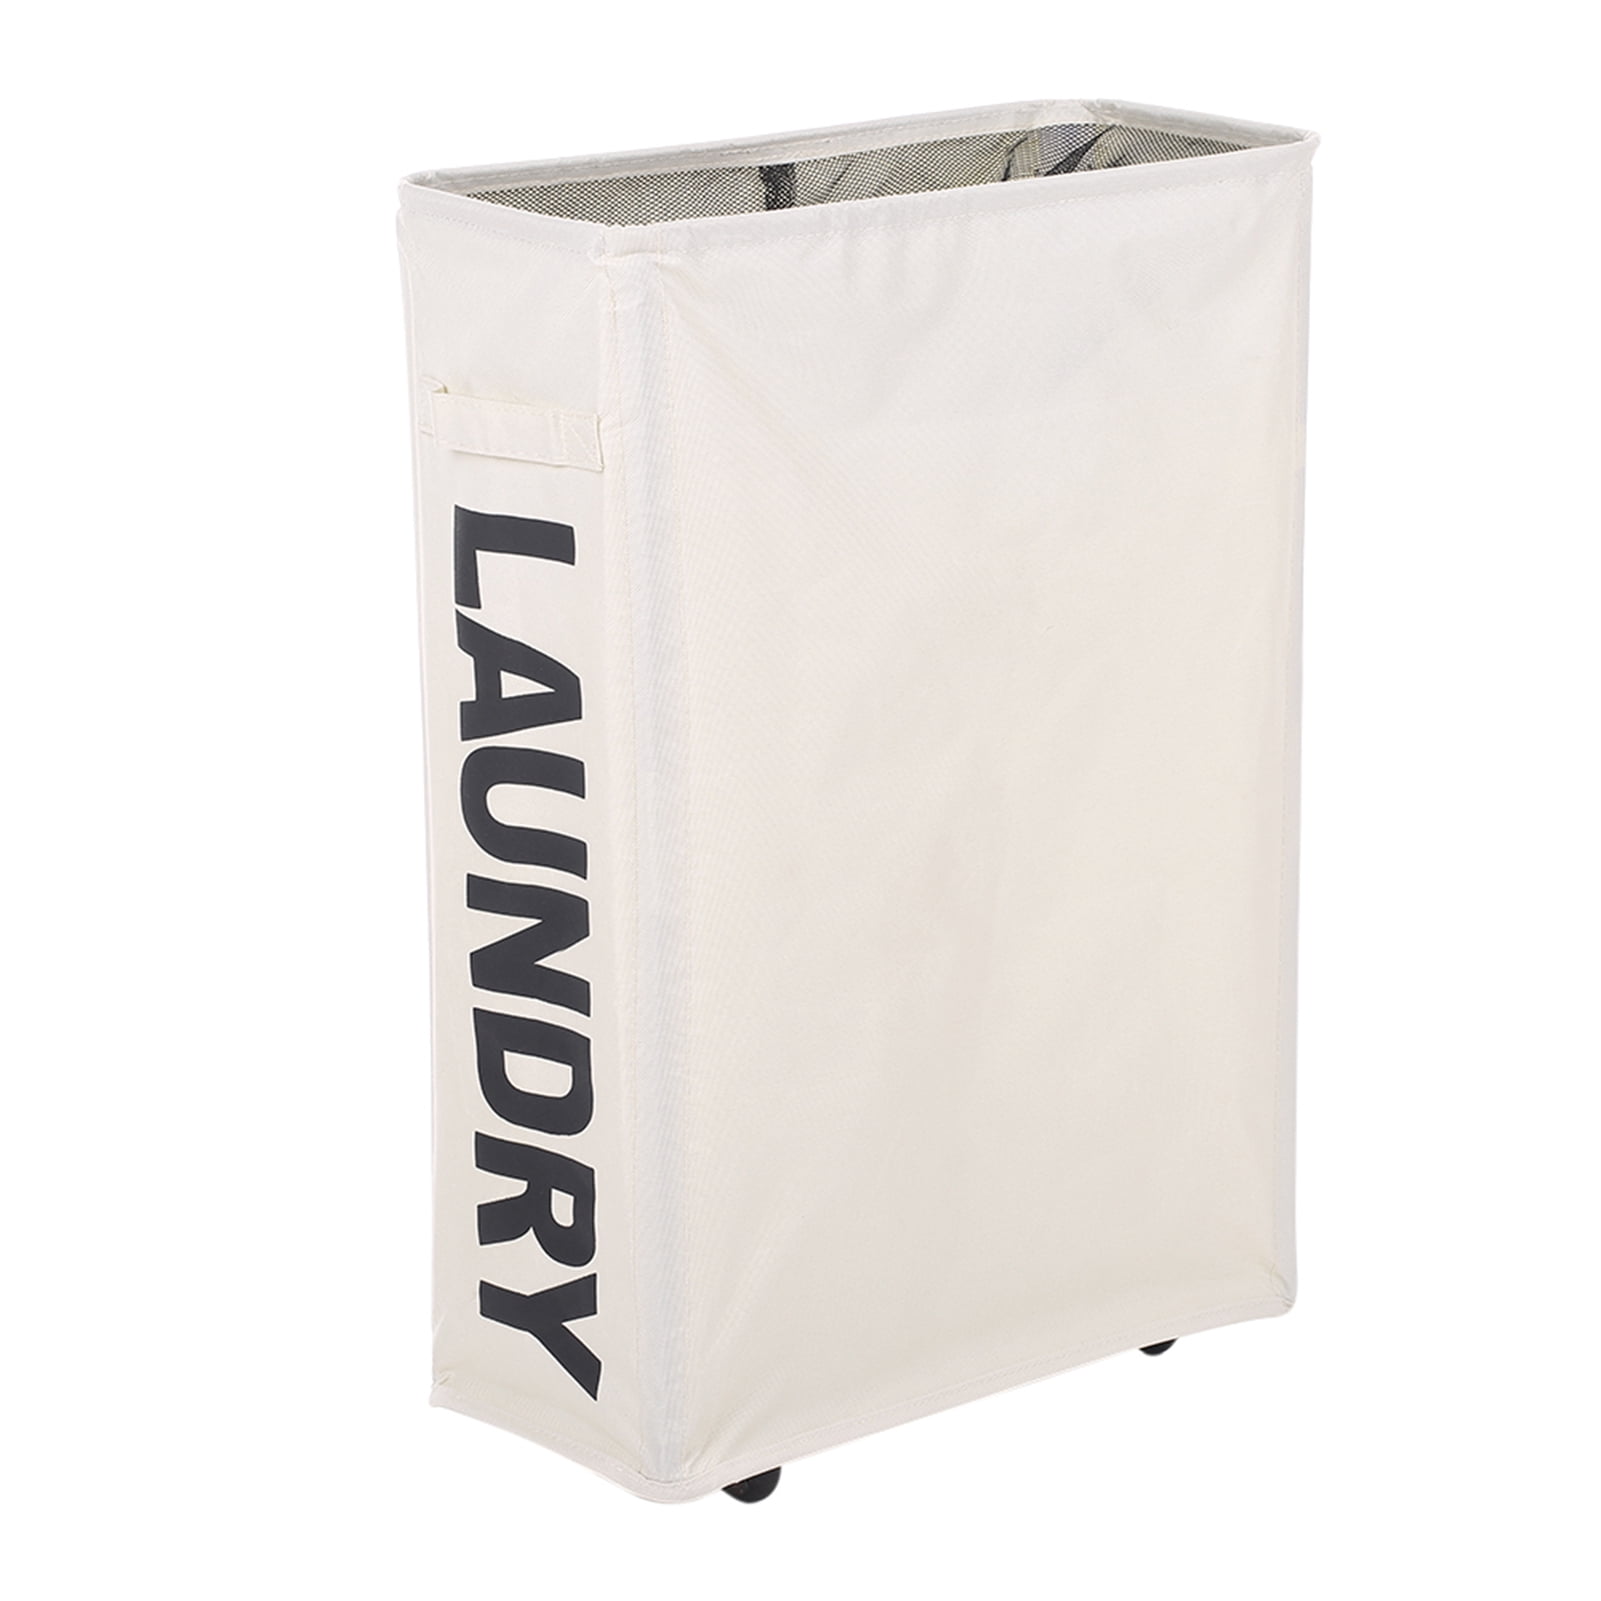 Details about   Chrislley Laundry Hamper With Wheels Slim Laundry Basket Foldable Dirty C.. New 